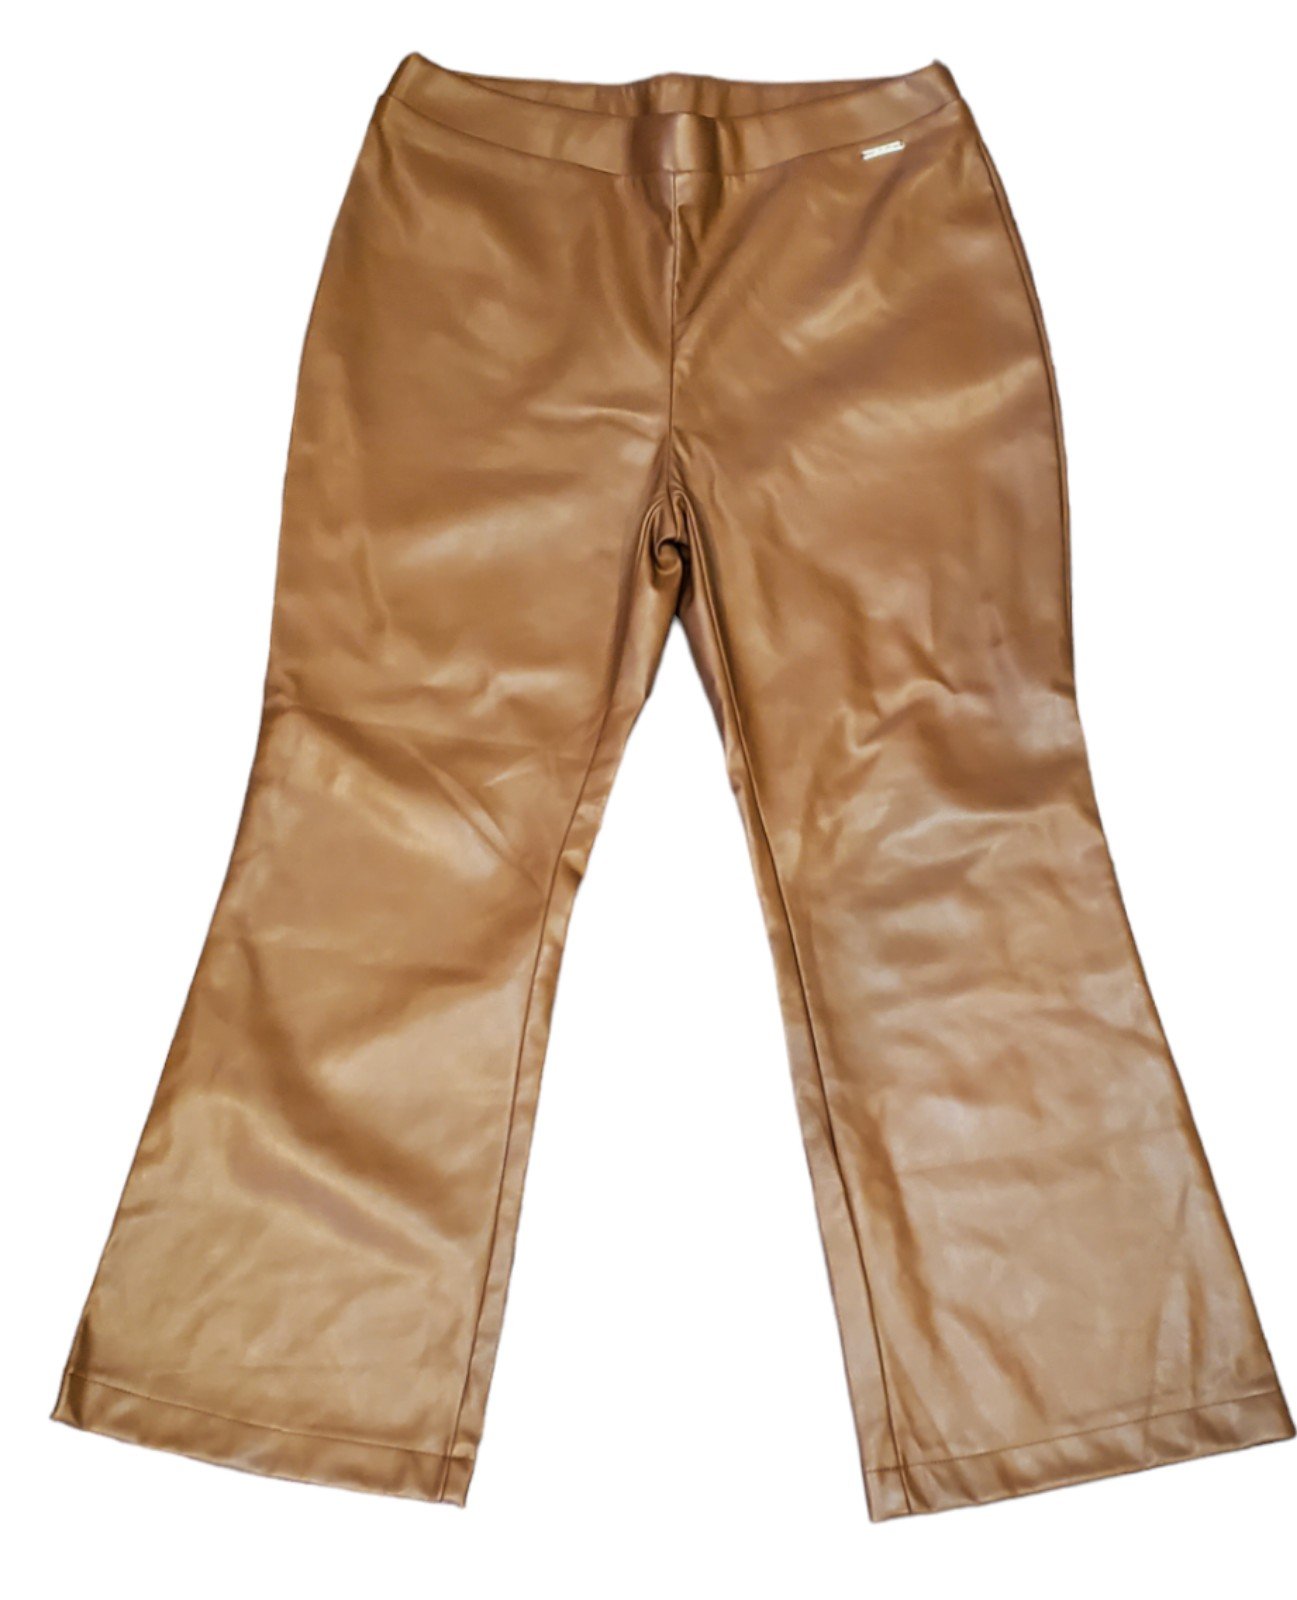 High quality New Marc New York Andrew Marc Women´s Faux Leather Brown Pants GjEIeqwx6 Outlet Store